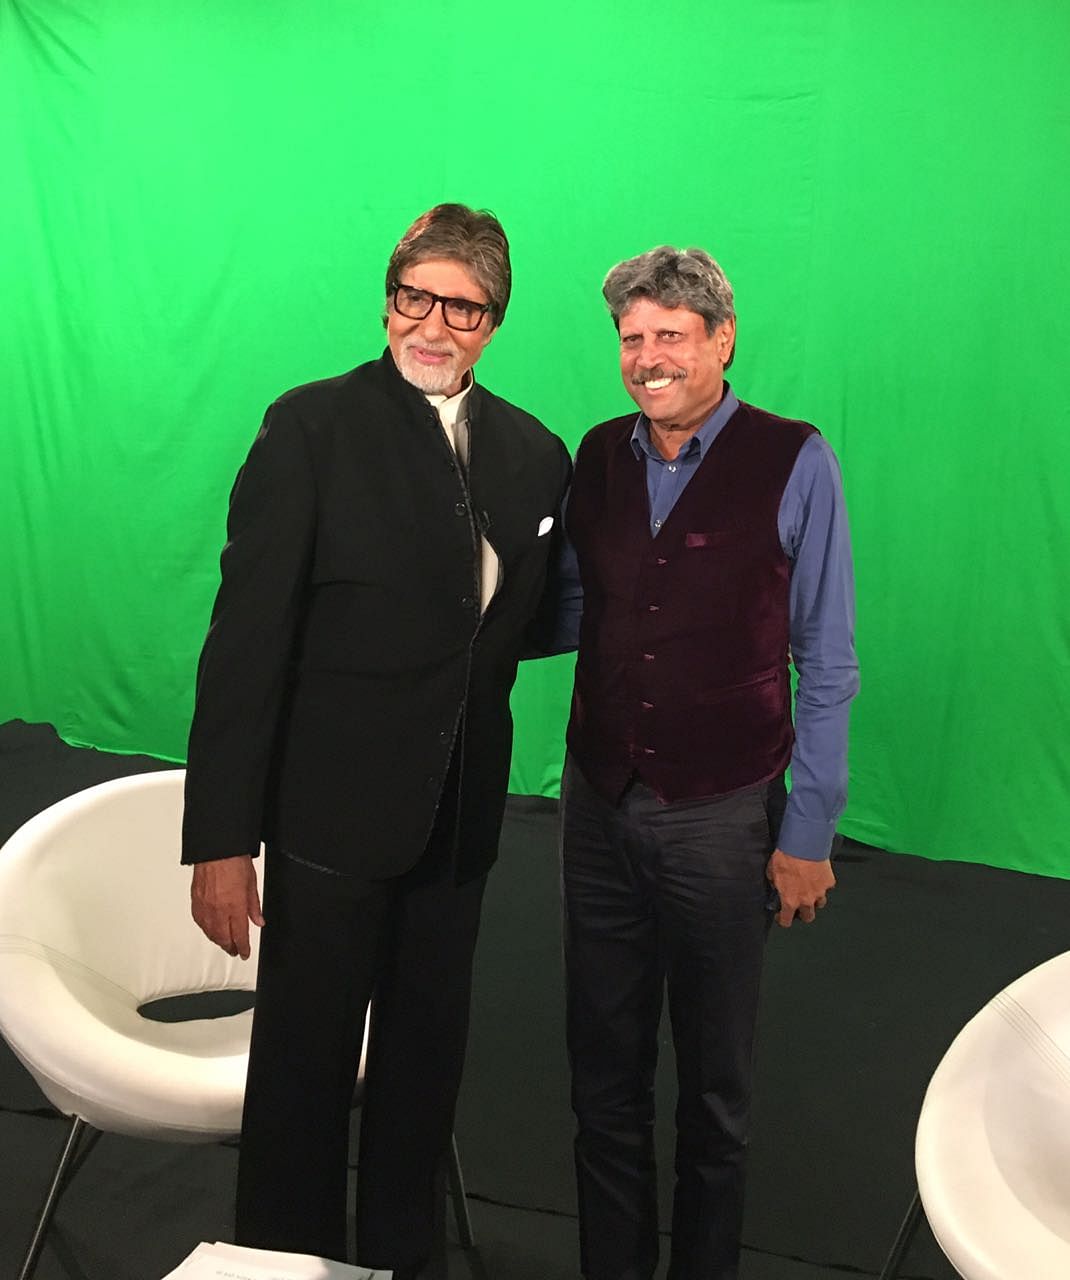 Kapil Dev turned interviewer for Amitabh Bachchan and it was a delight to see the two legends together.